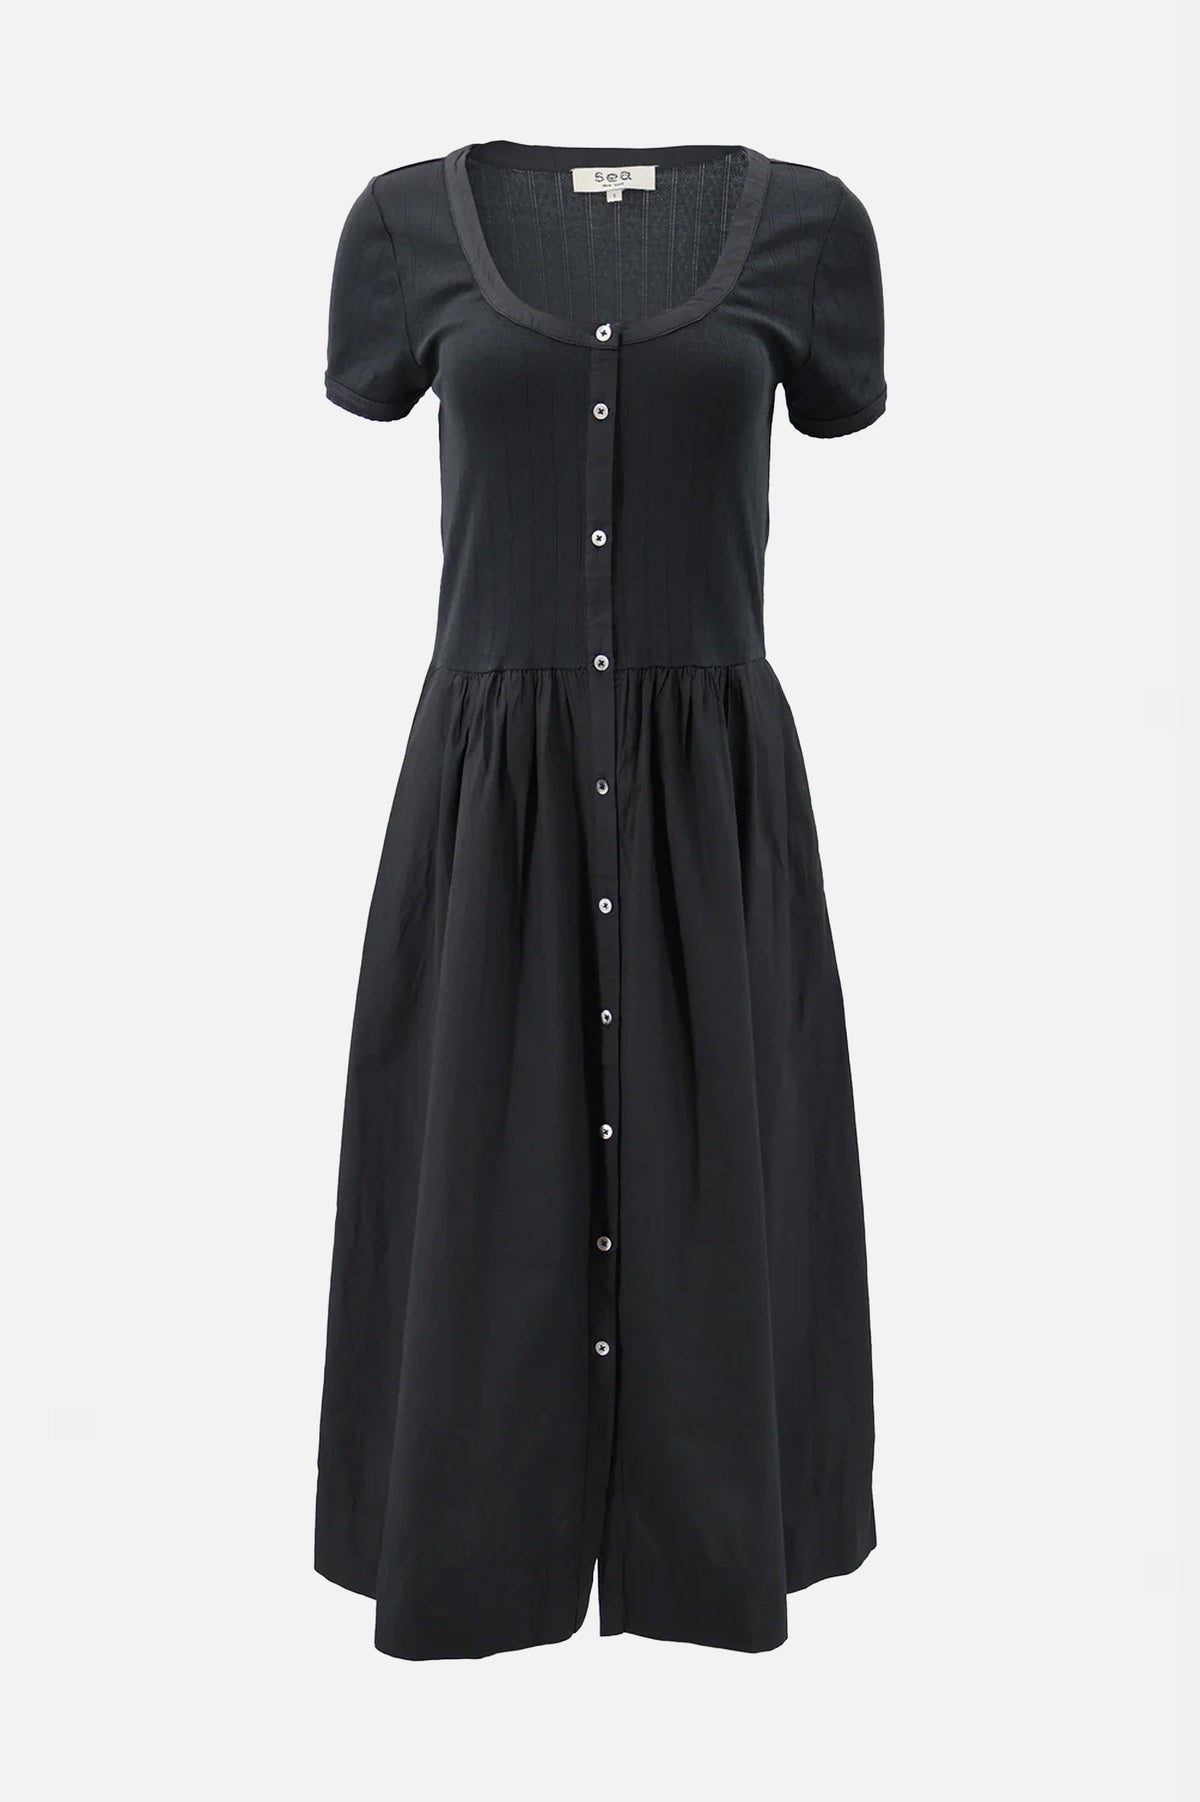 Salome Dress in Charcoal